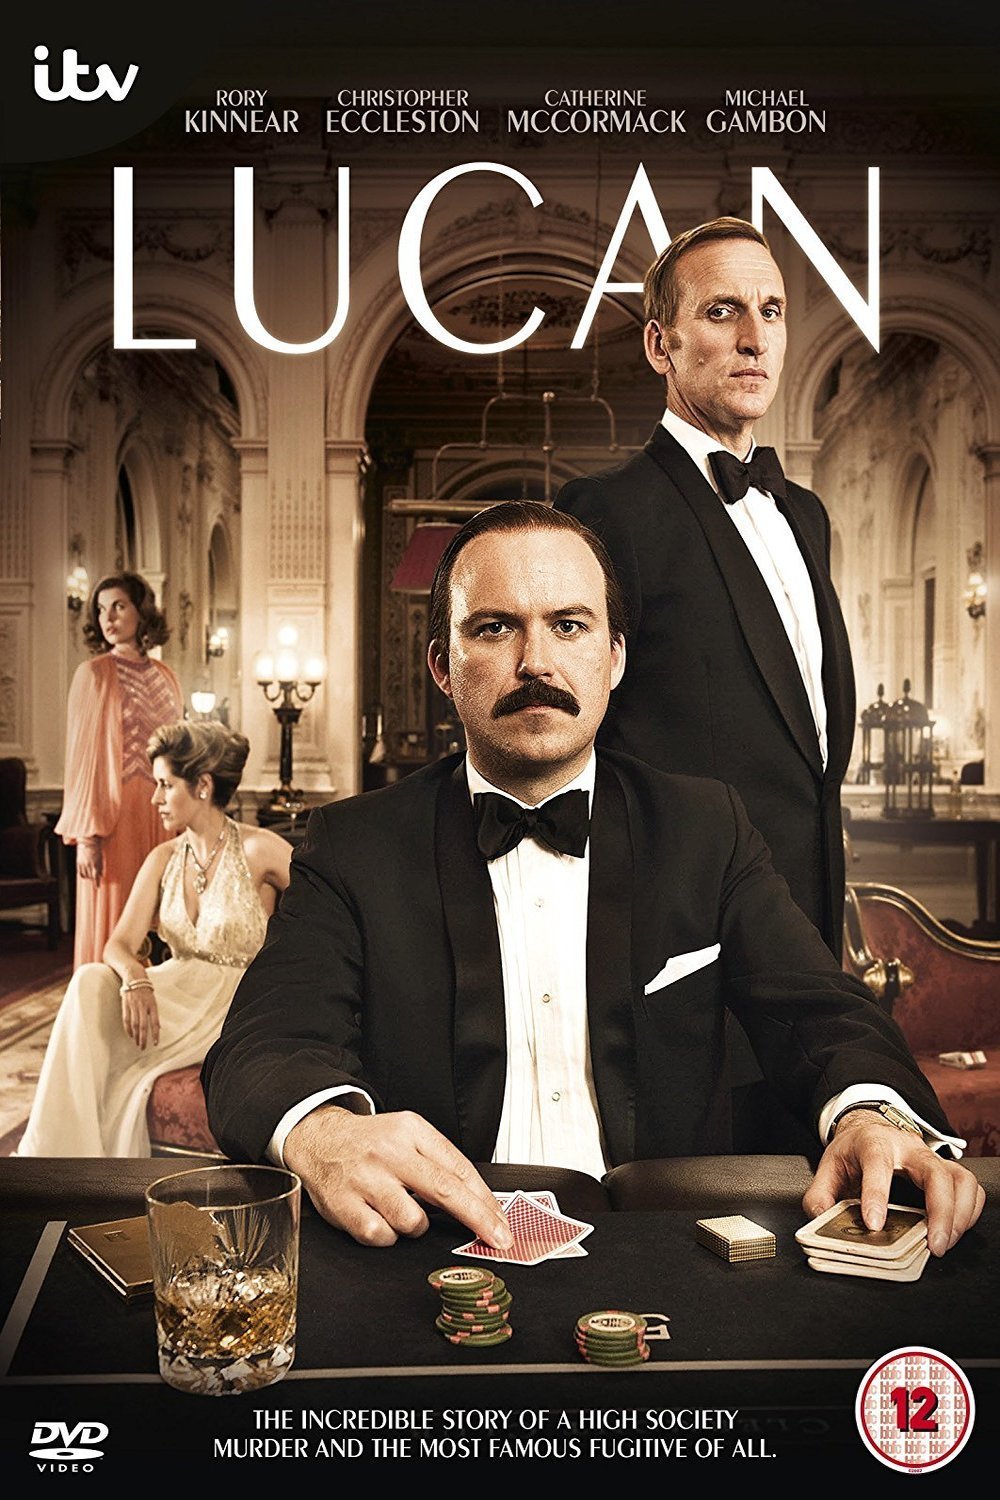 Poster of the movie Lucan